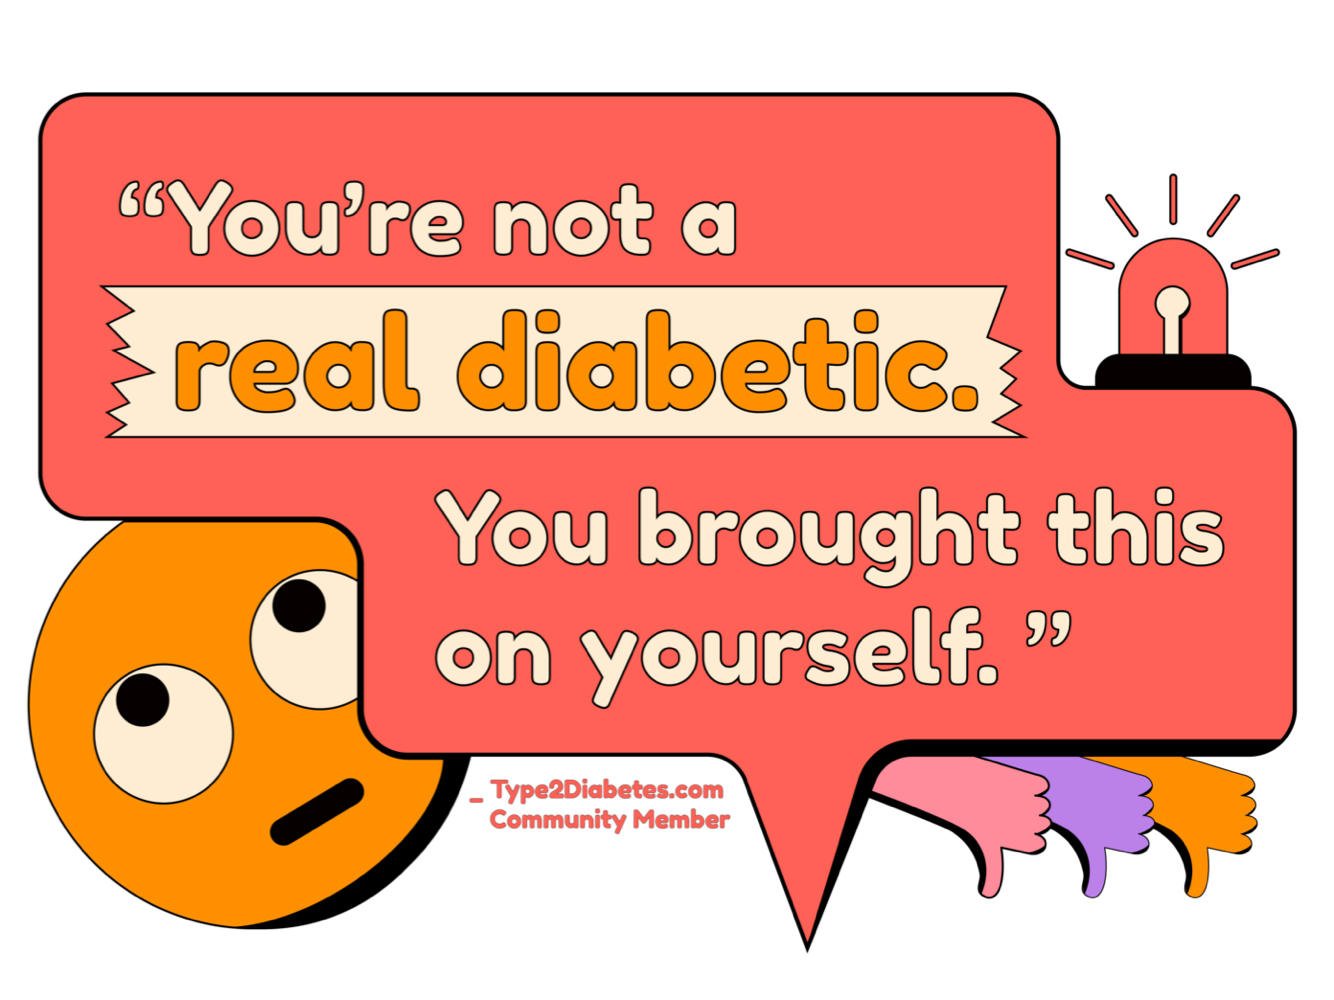 you're not a real diabetic. You brought this on yourself. - type2diabetes.com Community Member